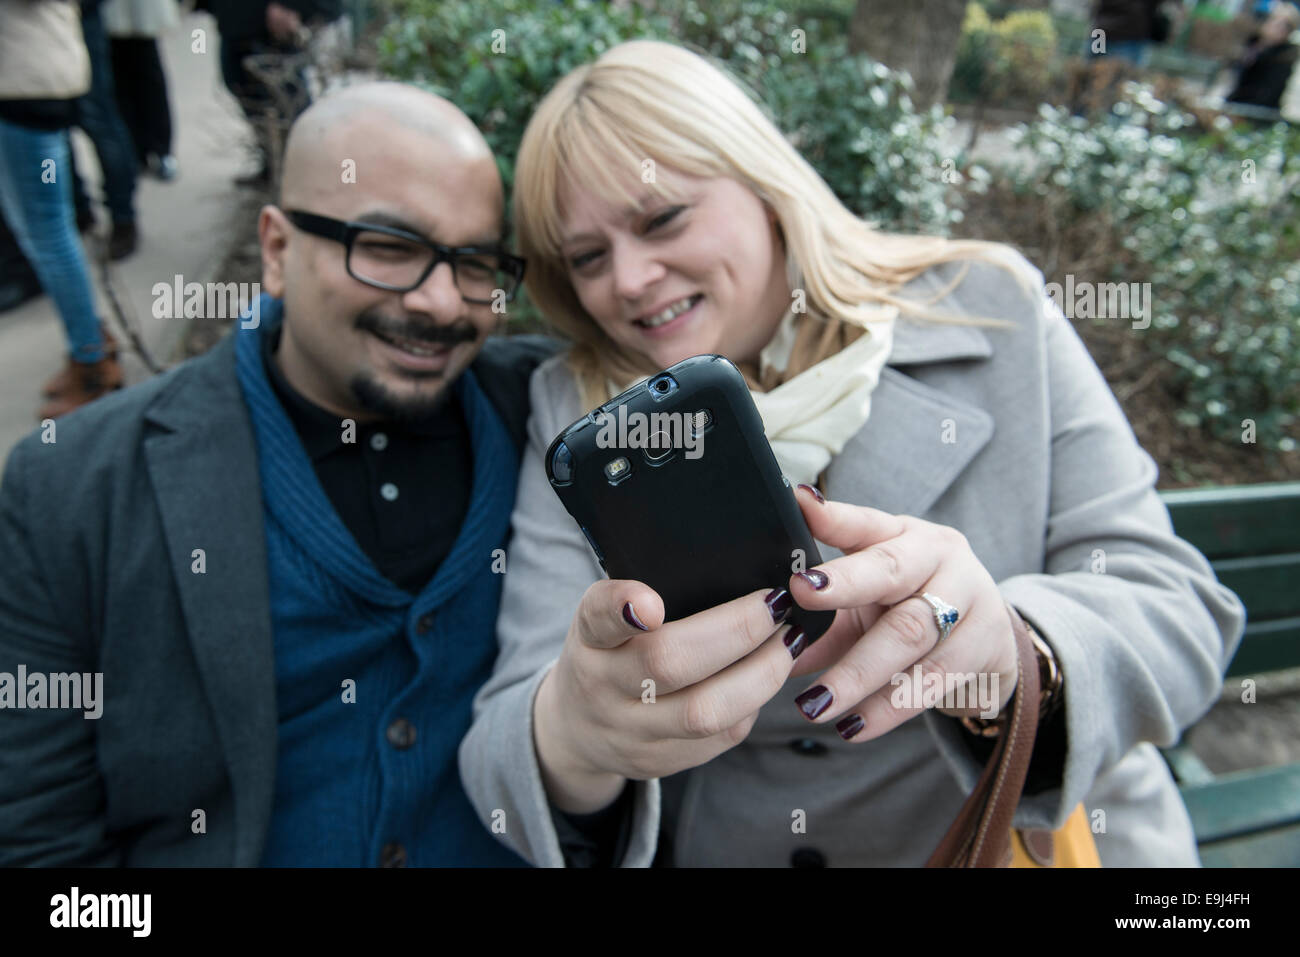 a real authentic couple sit on a bench in paris and take a selfie on a smart phone while looking happy Stock Photo